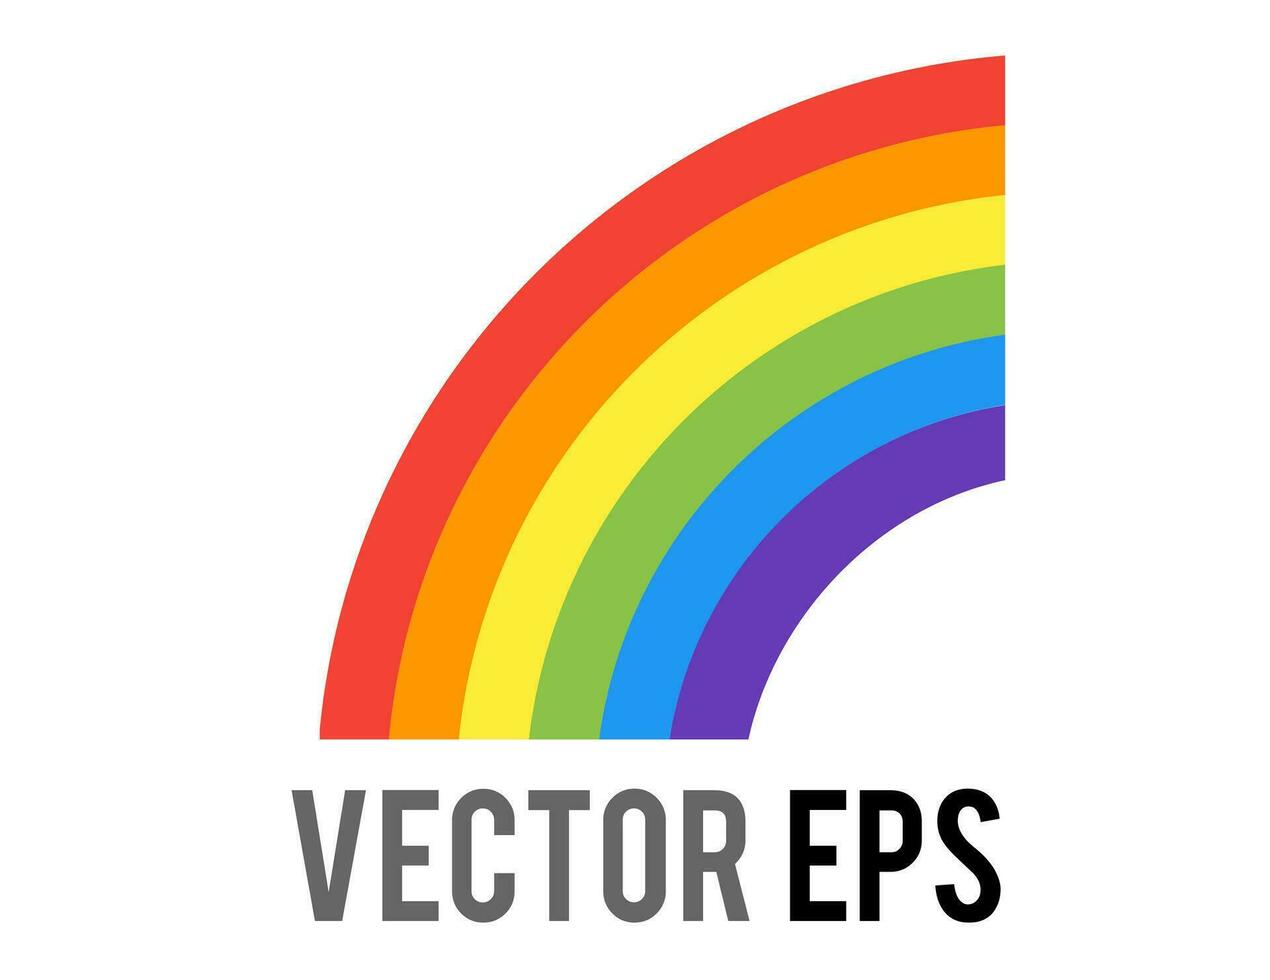 Vector half of a full rainbow icon, showing six bands of color red, orange, yellow, green, blue, violet